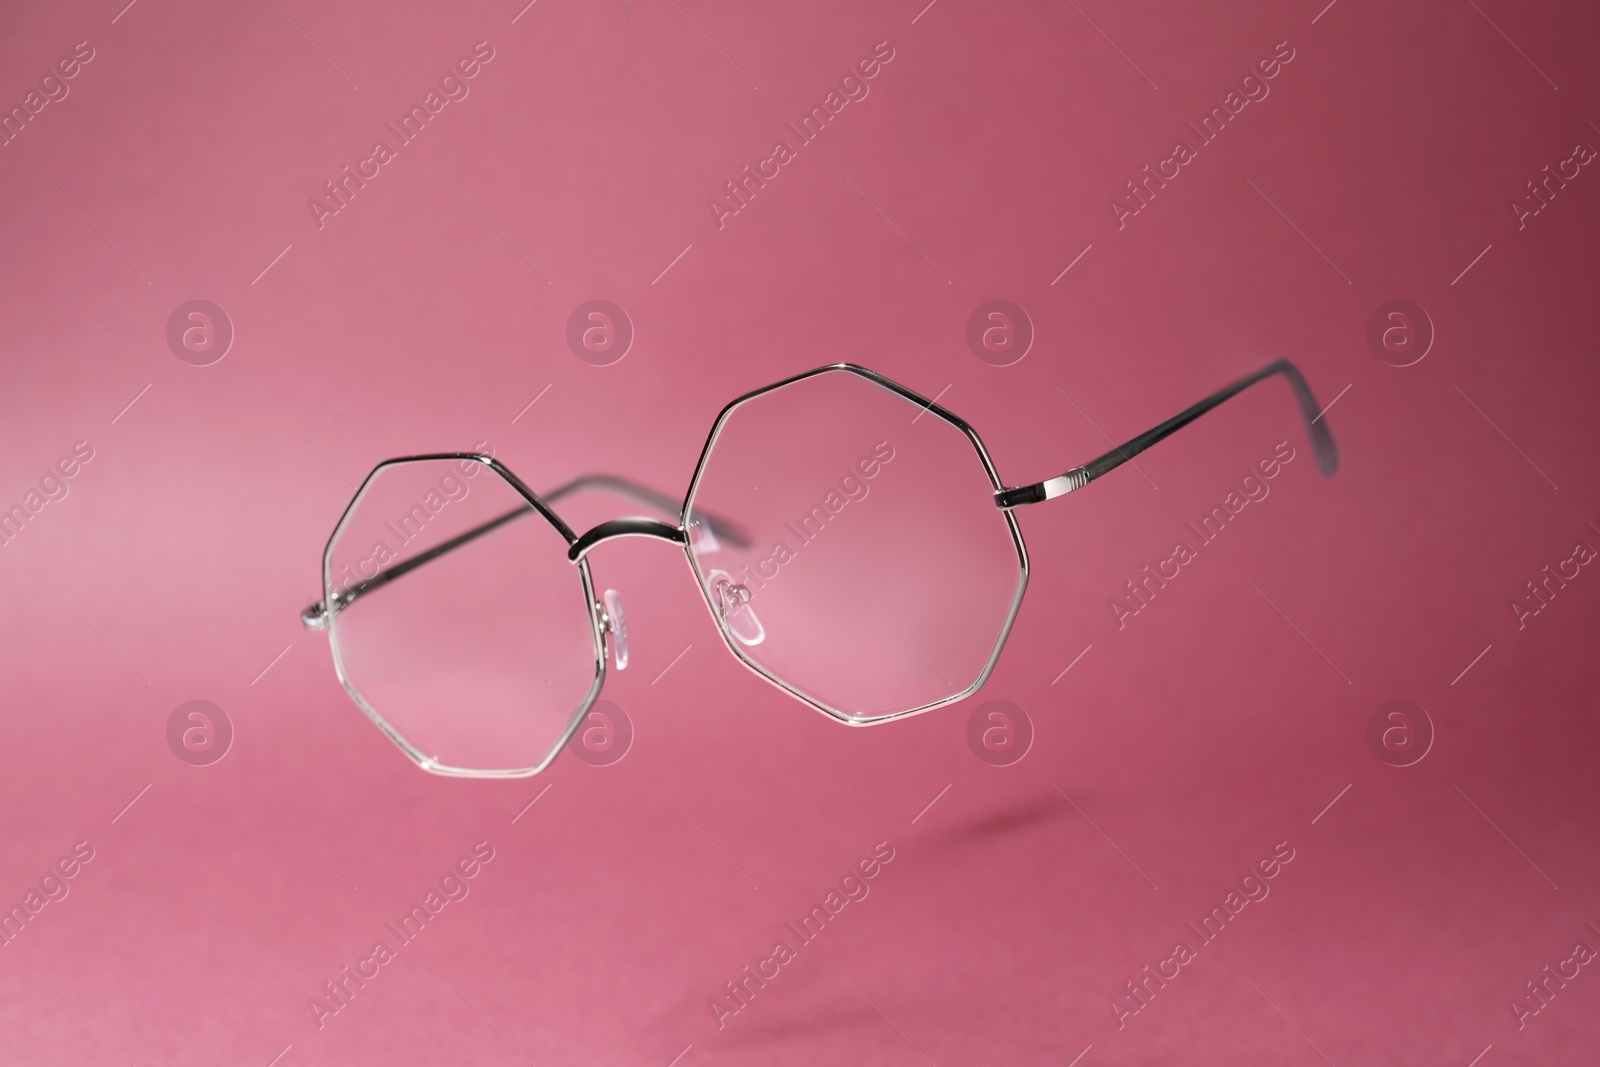 Photo of Stylish pair of glasses with metal frame on pink background